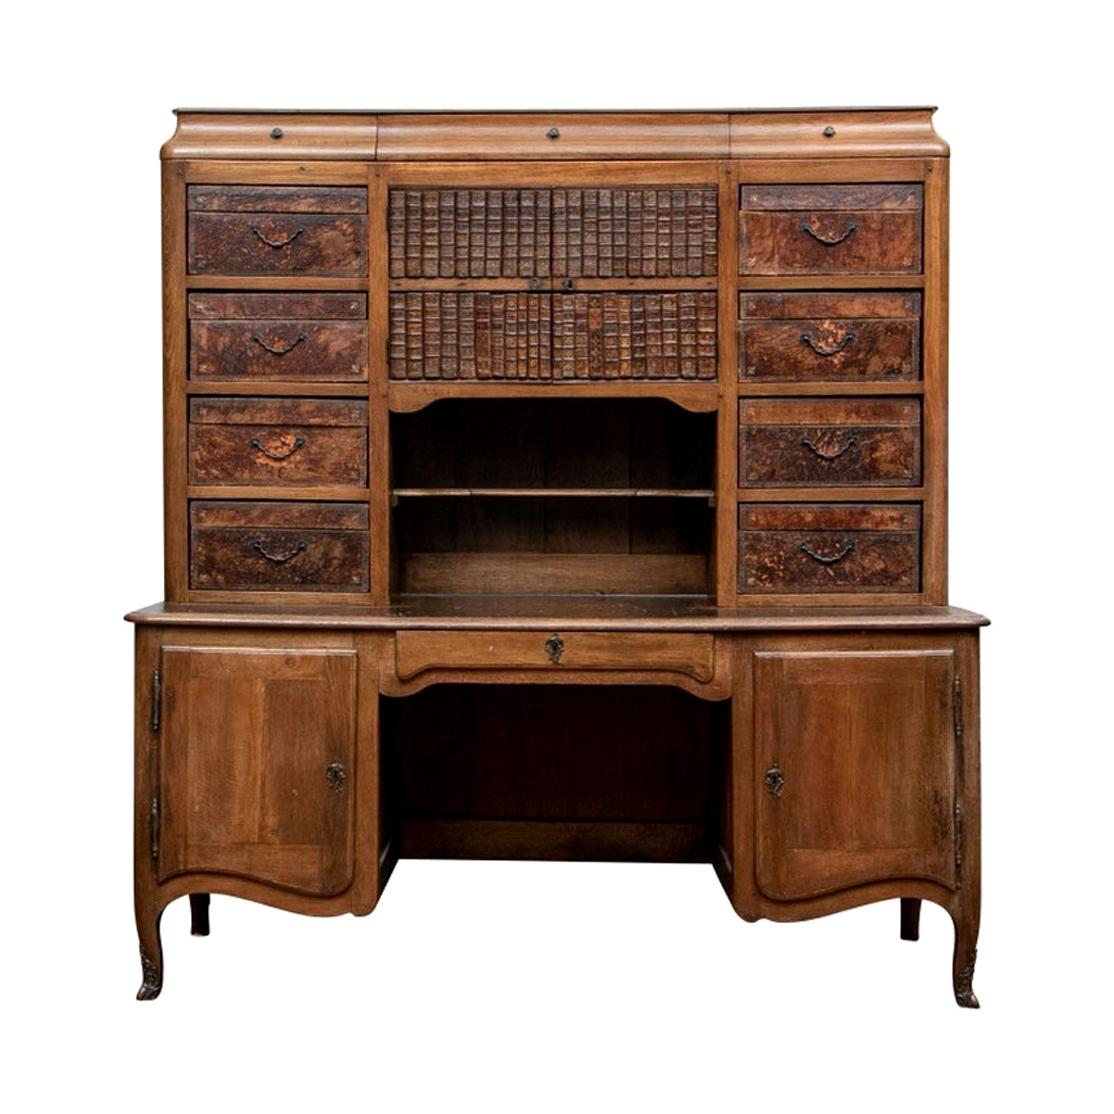 Notable French Secretaire Cabinet With Leather Bound Doors And Drawers For Sale